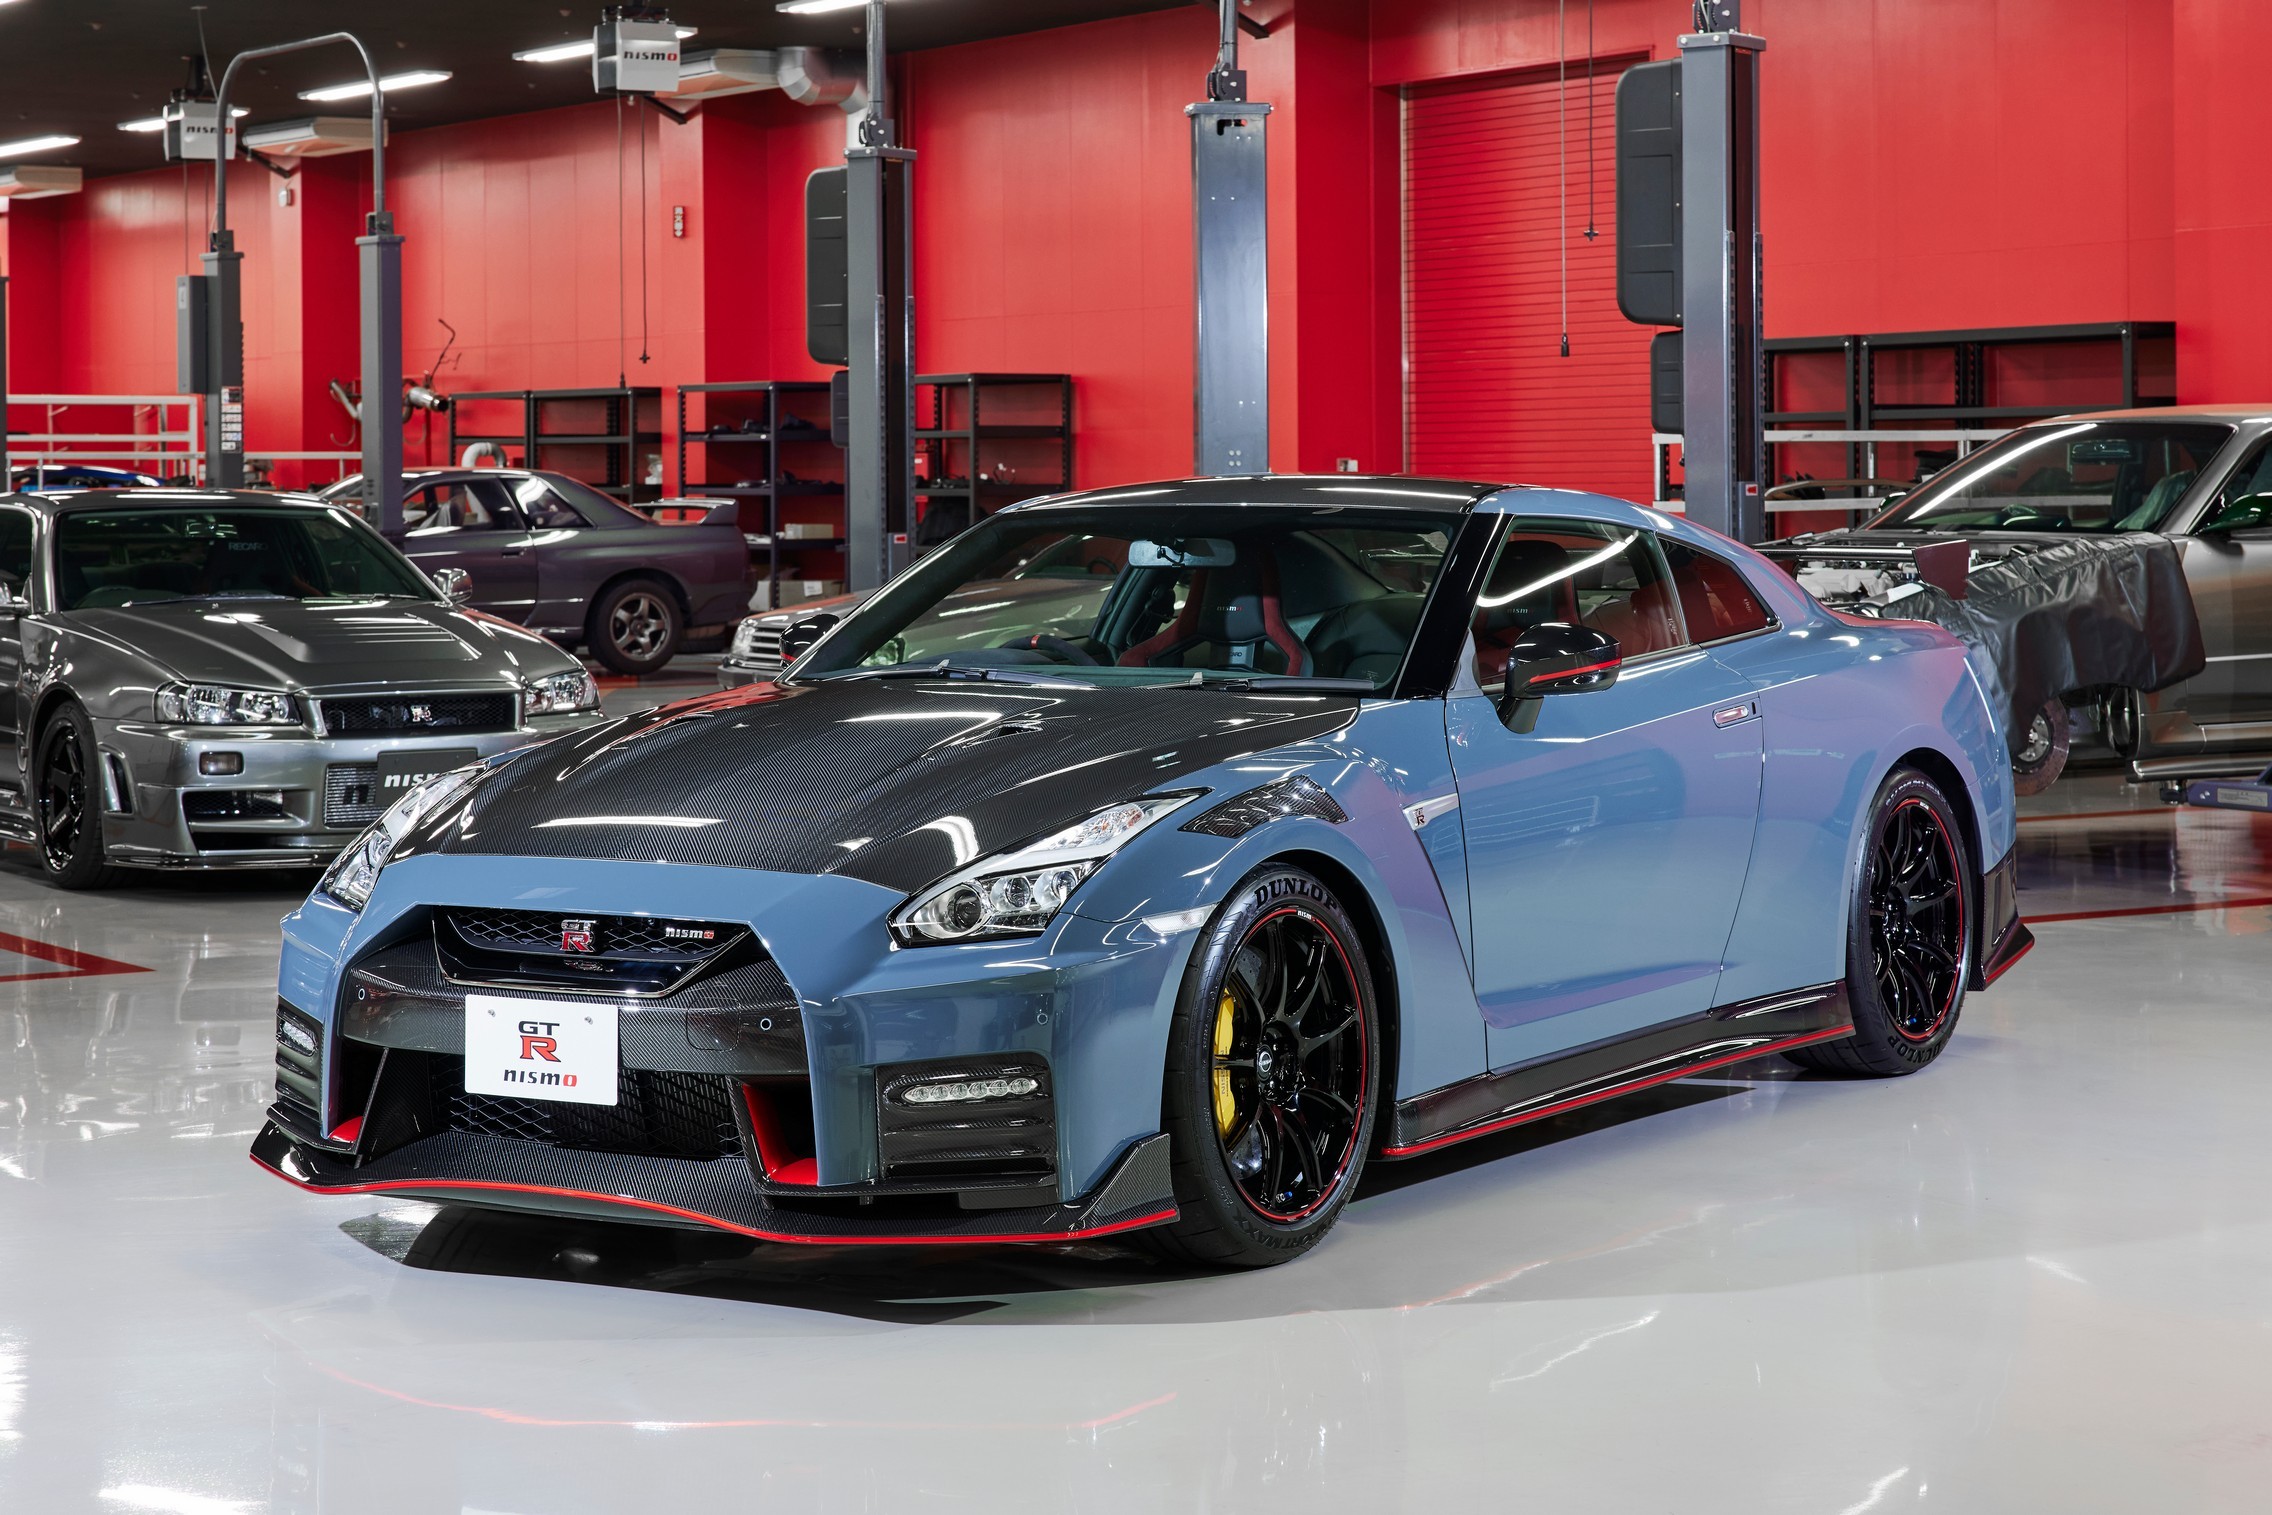 Wild new Nissan GT-R is 'tangible lucid dream